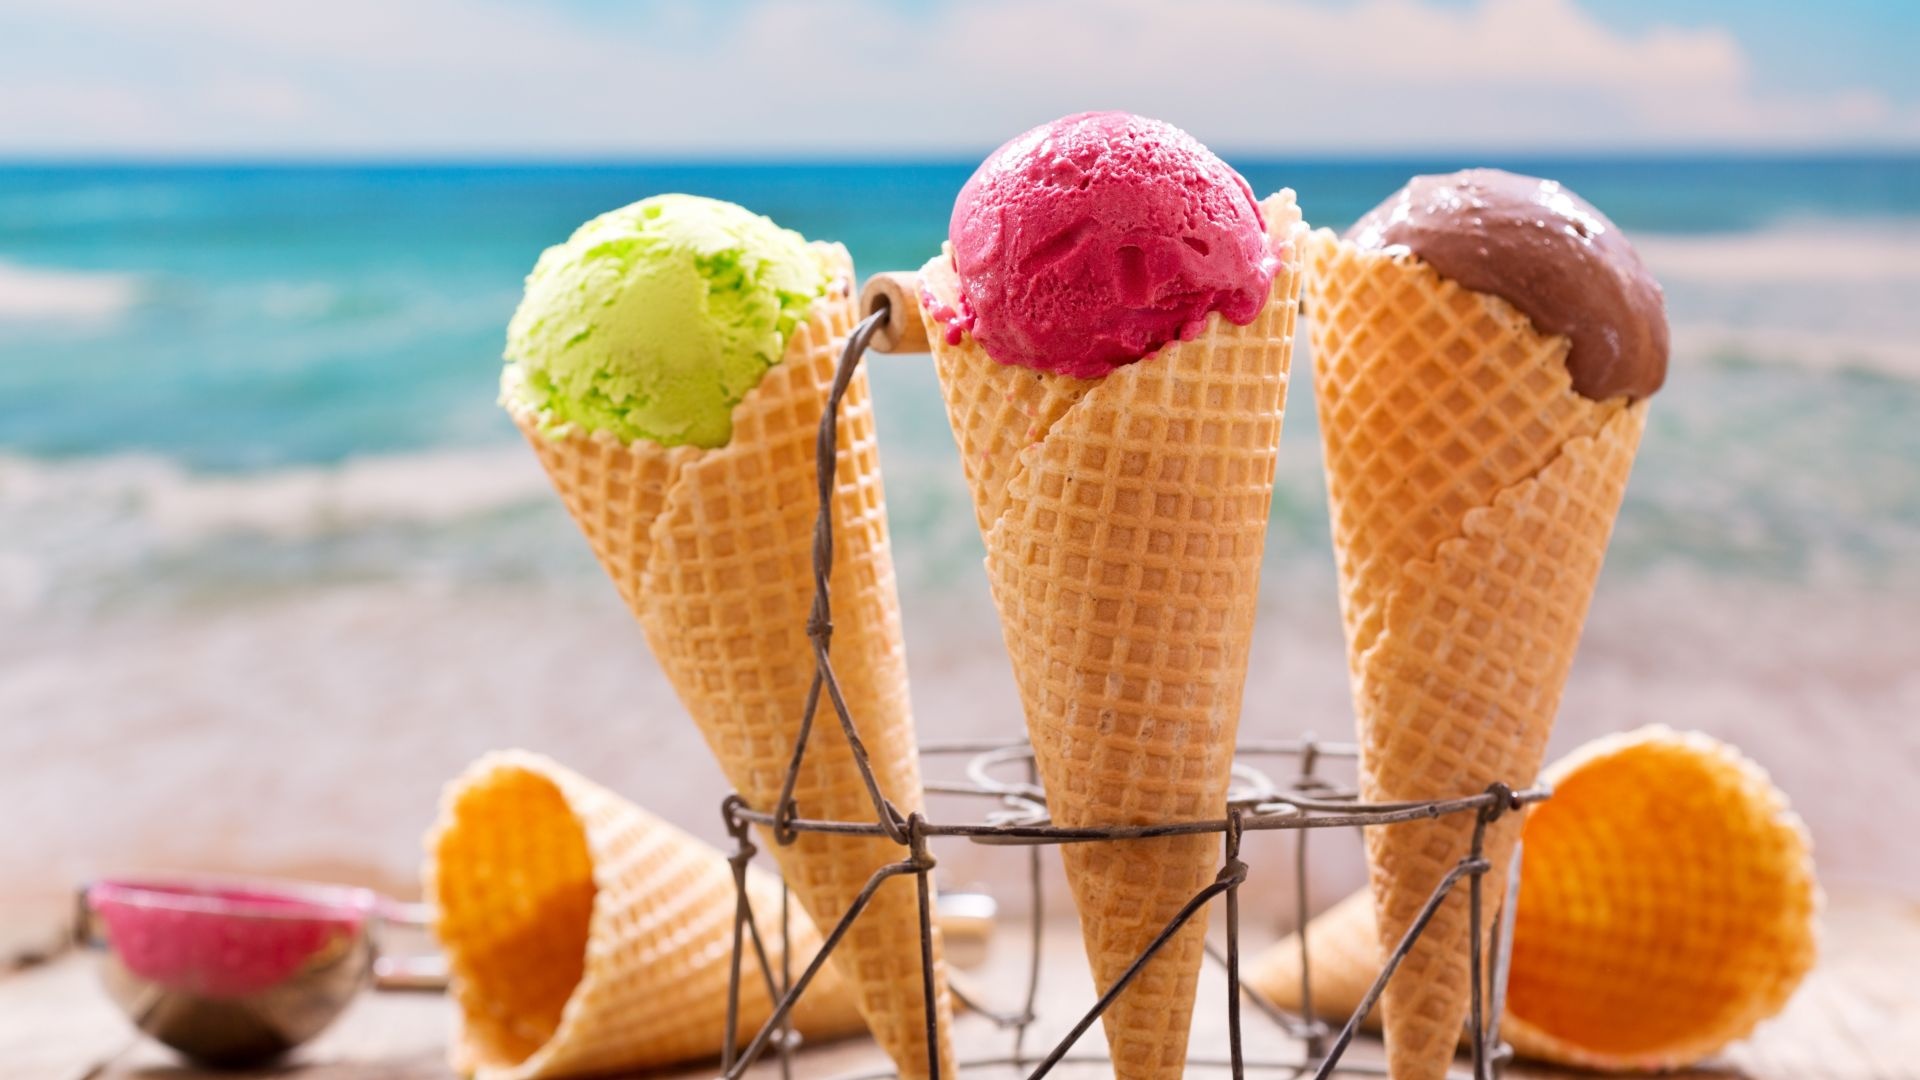 Waffle: Ice cream cones, Used for holding scoops of ice cream. 1920x1080 Full HD Wallpaper.